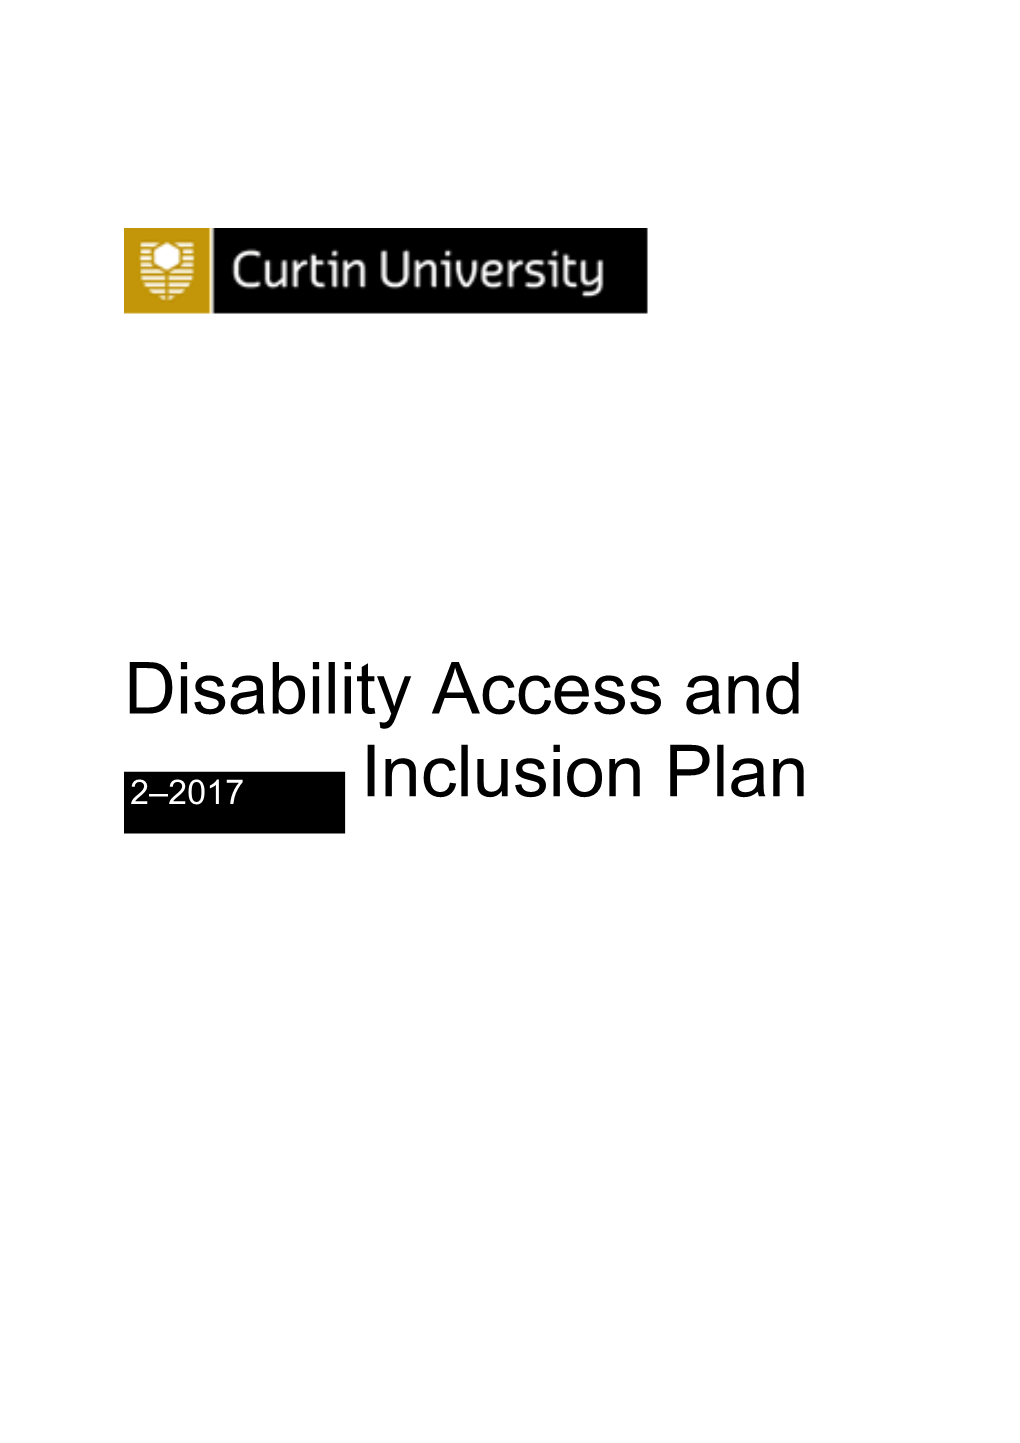 Disability Access and Inclusion Plan 2012-2017